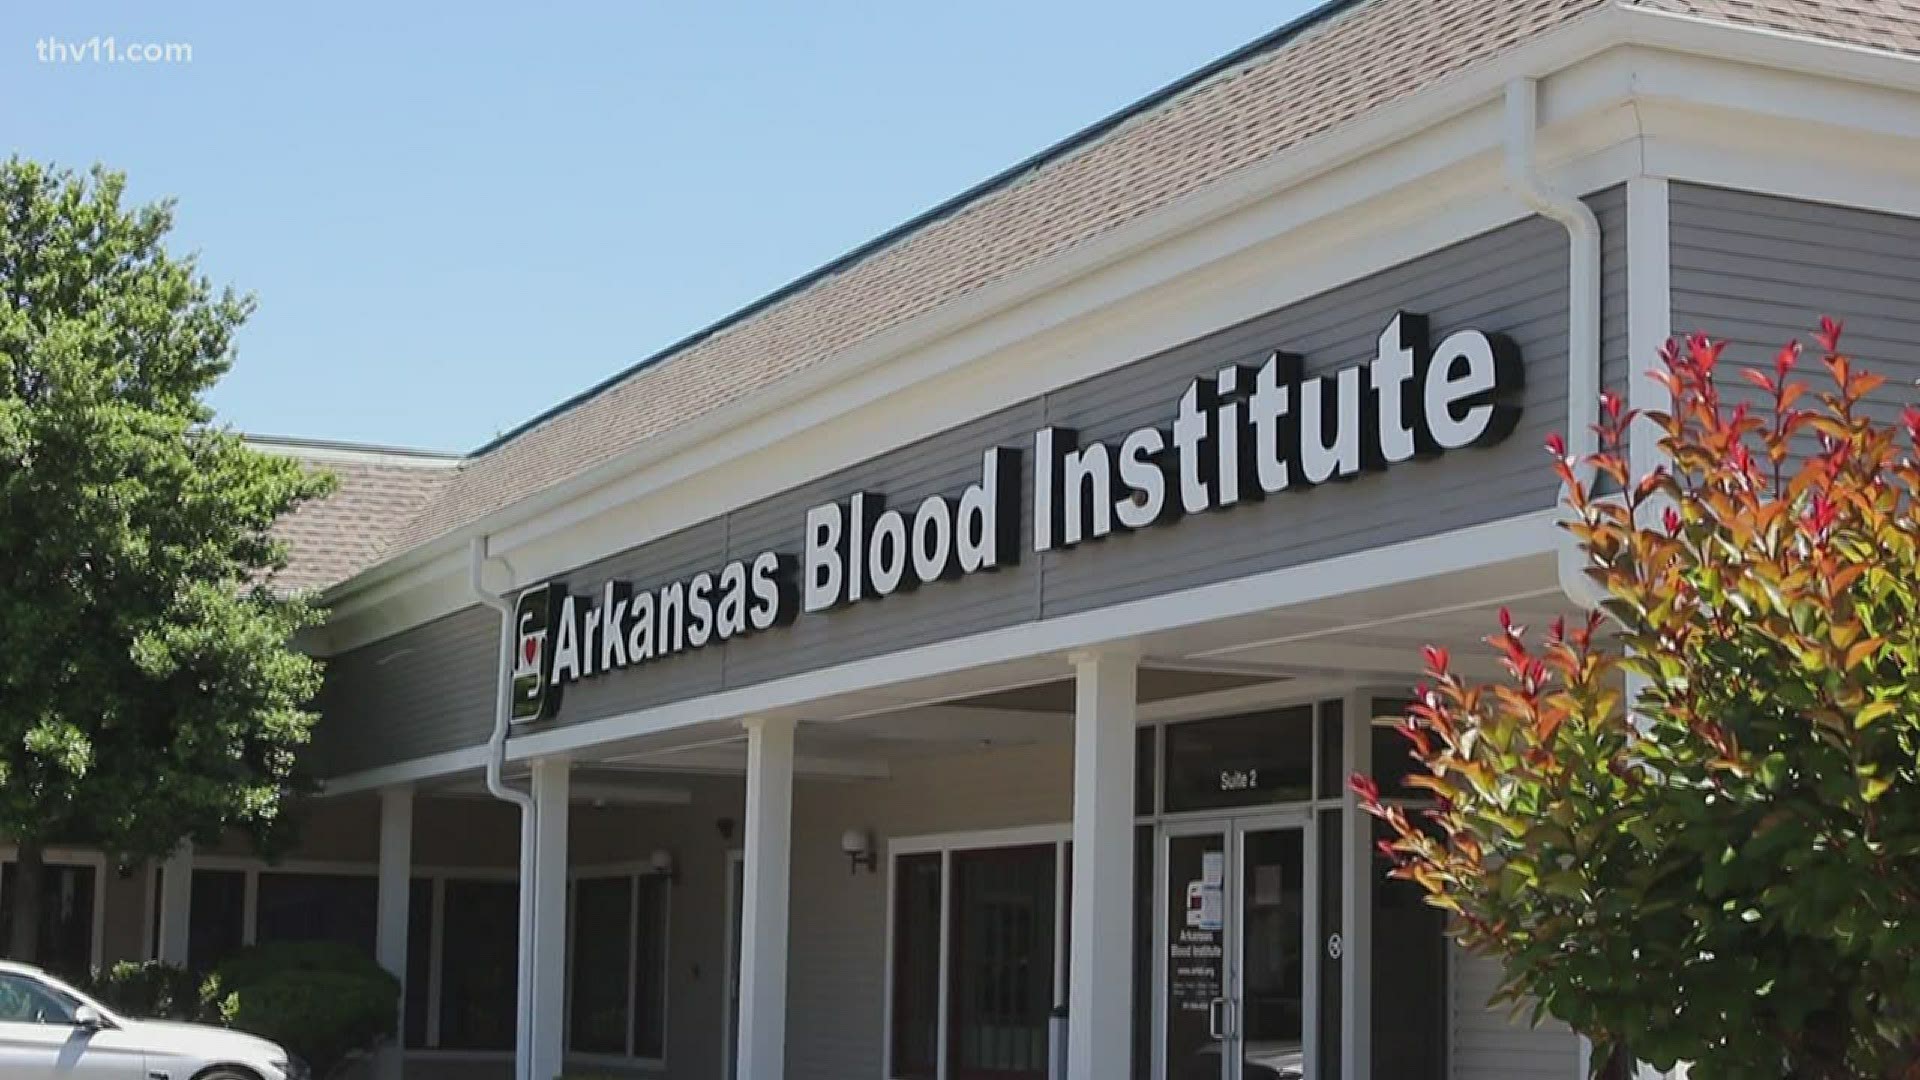 The Arkansas Blood Institute announced it will be offering free antibody testing to blood donors ages 18 and up.